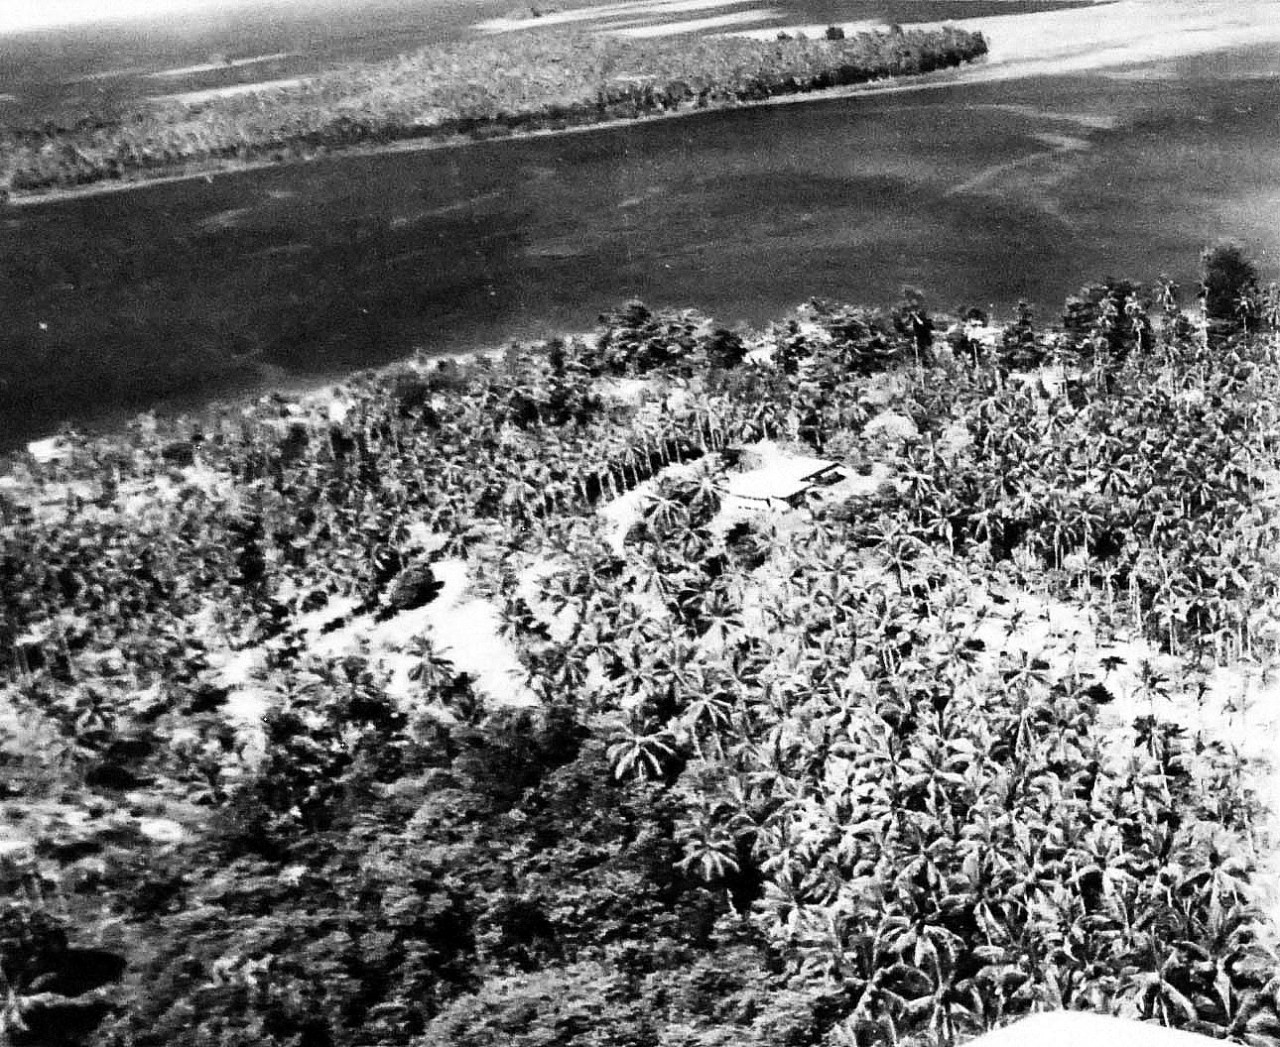 80-G-59085:  Bougainville Campaign, November 1943-August 1945.    Aerials of Bougainville Island, Solomon Islands, 20 December 1943.  Official U.S. Navy Photograph, now in the collections of the National Archives.   (2014/4/24).  